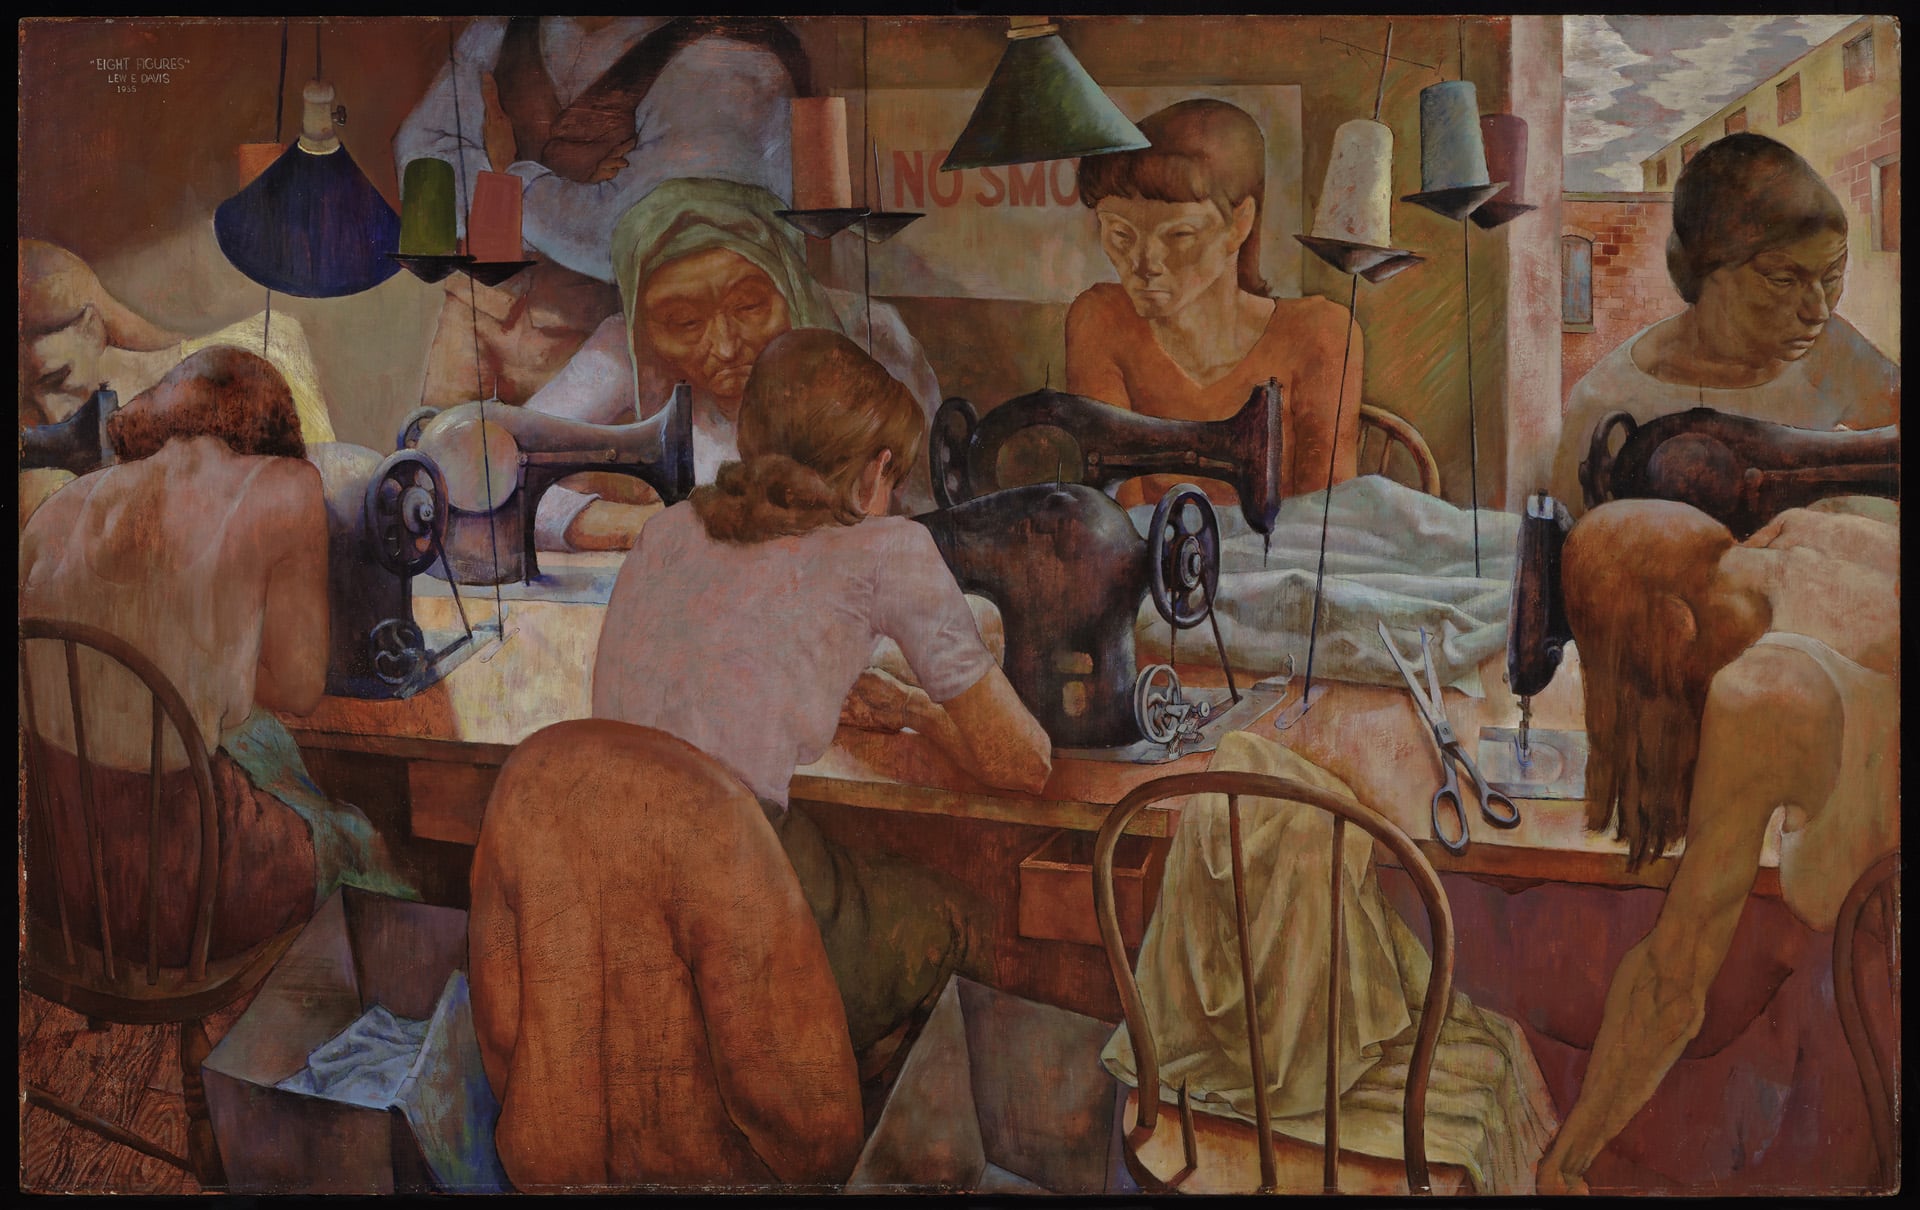 7 women work at sewing machines while a man watches over